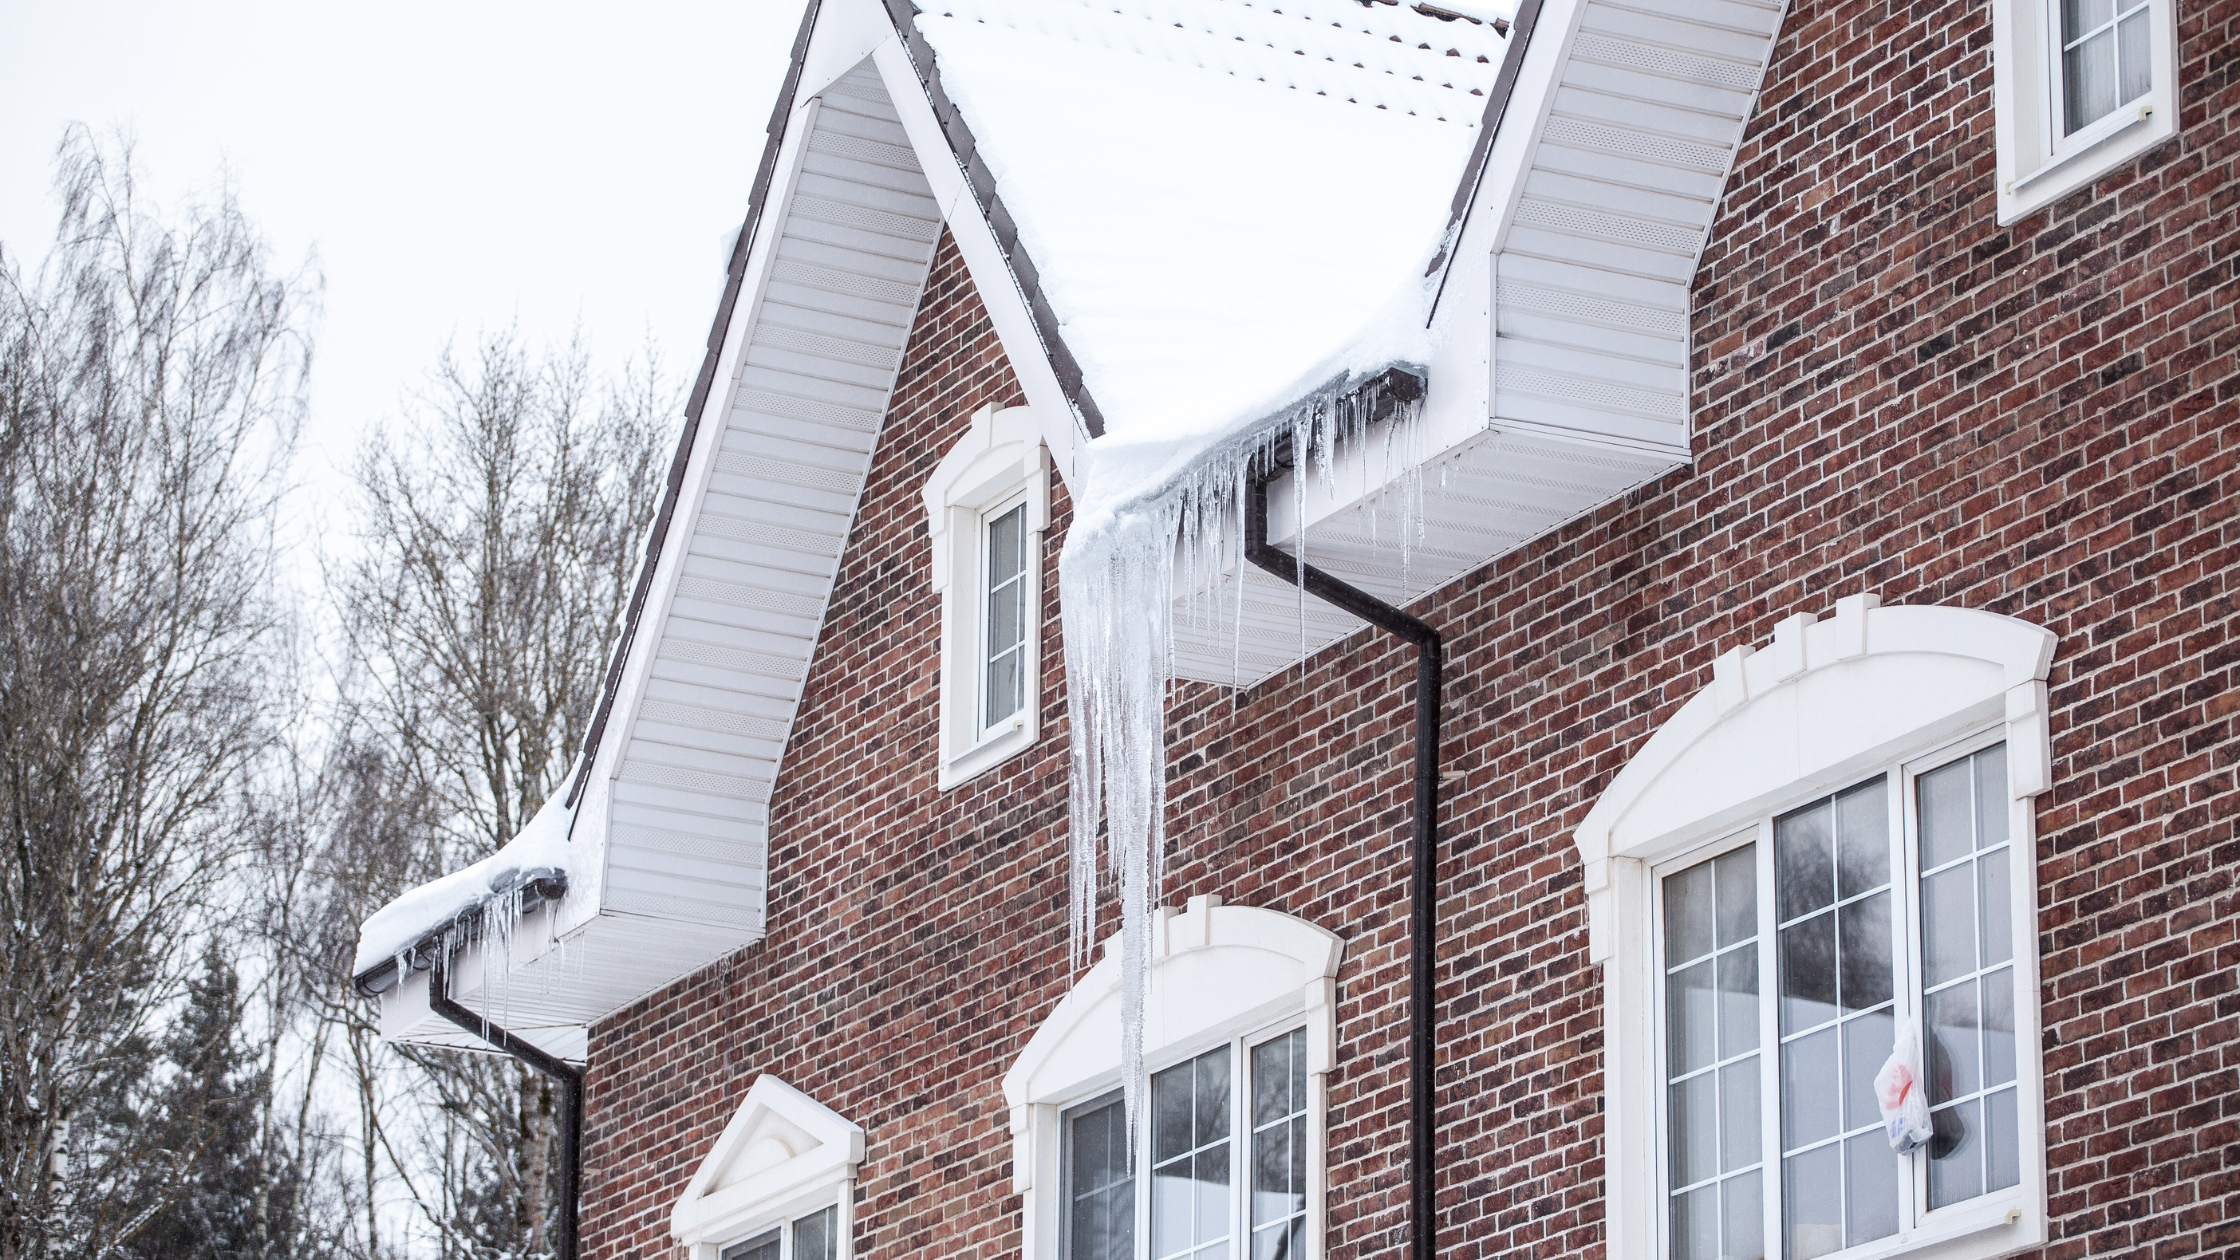 Ice dams hanging off of a brick house in winter